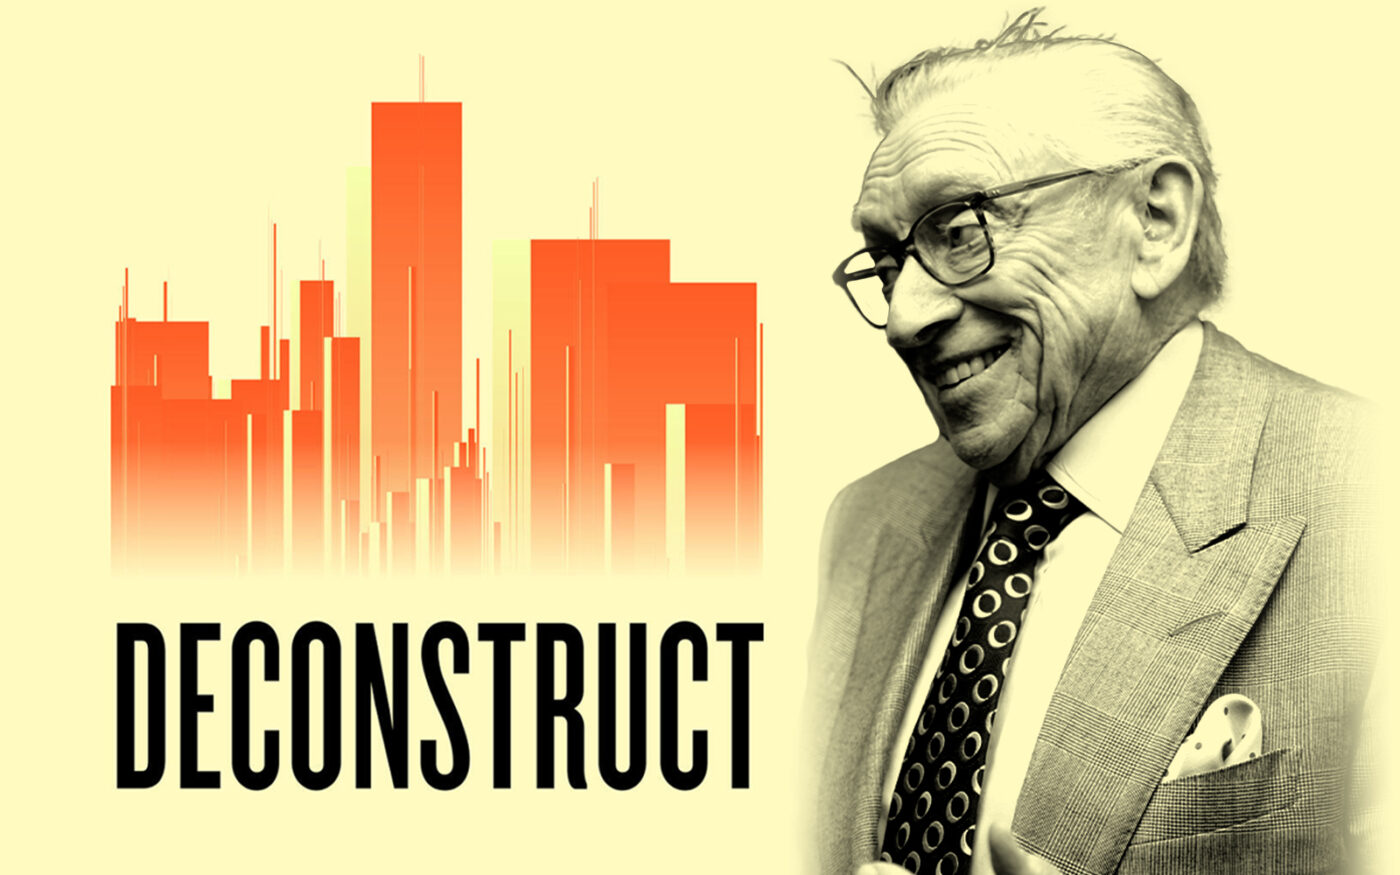 Larry Silverstein on The Real Deal’s Deconstruct